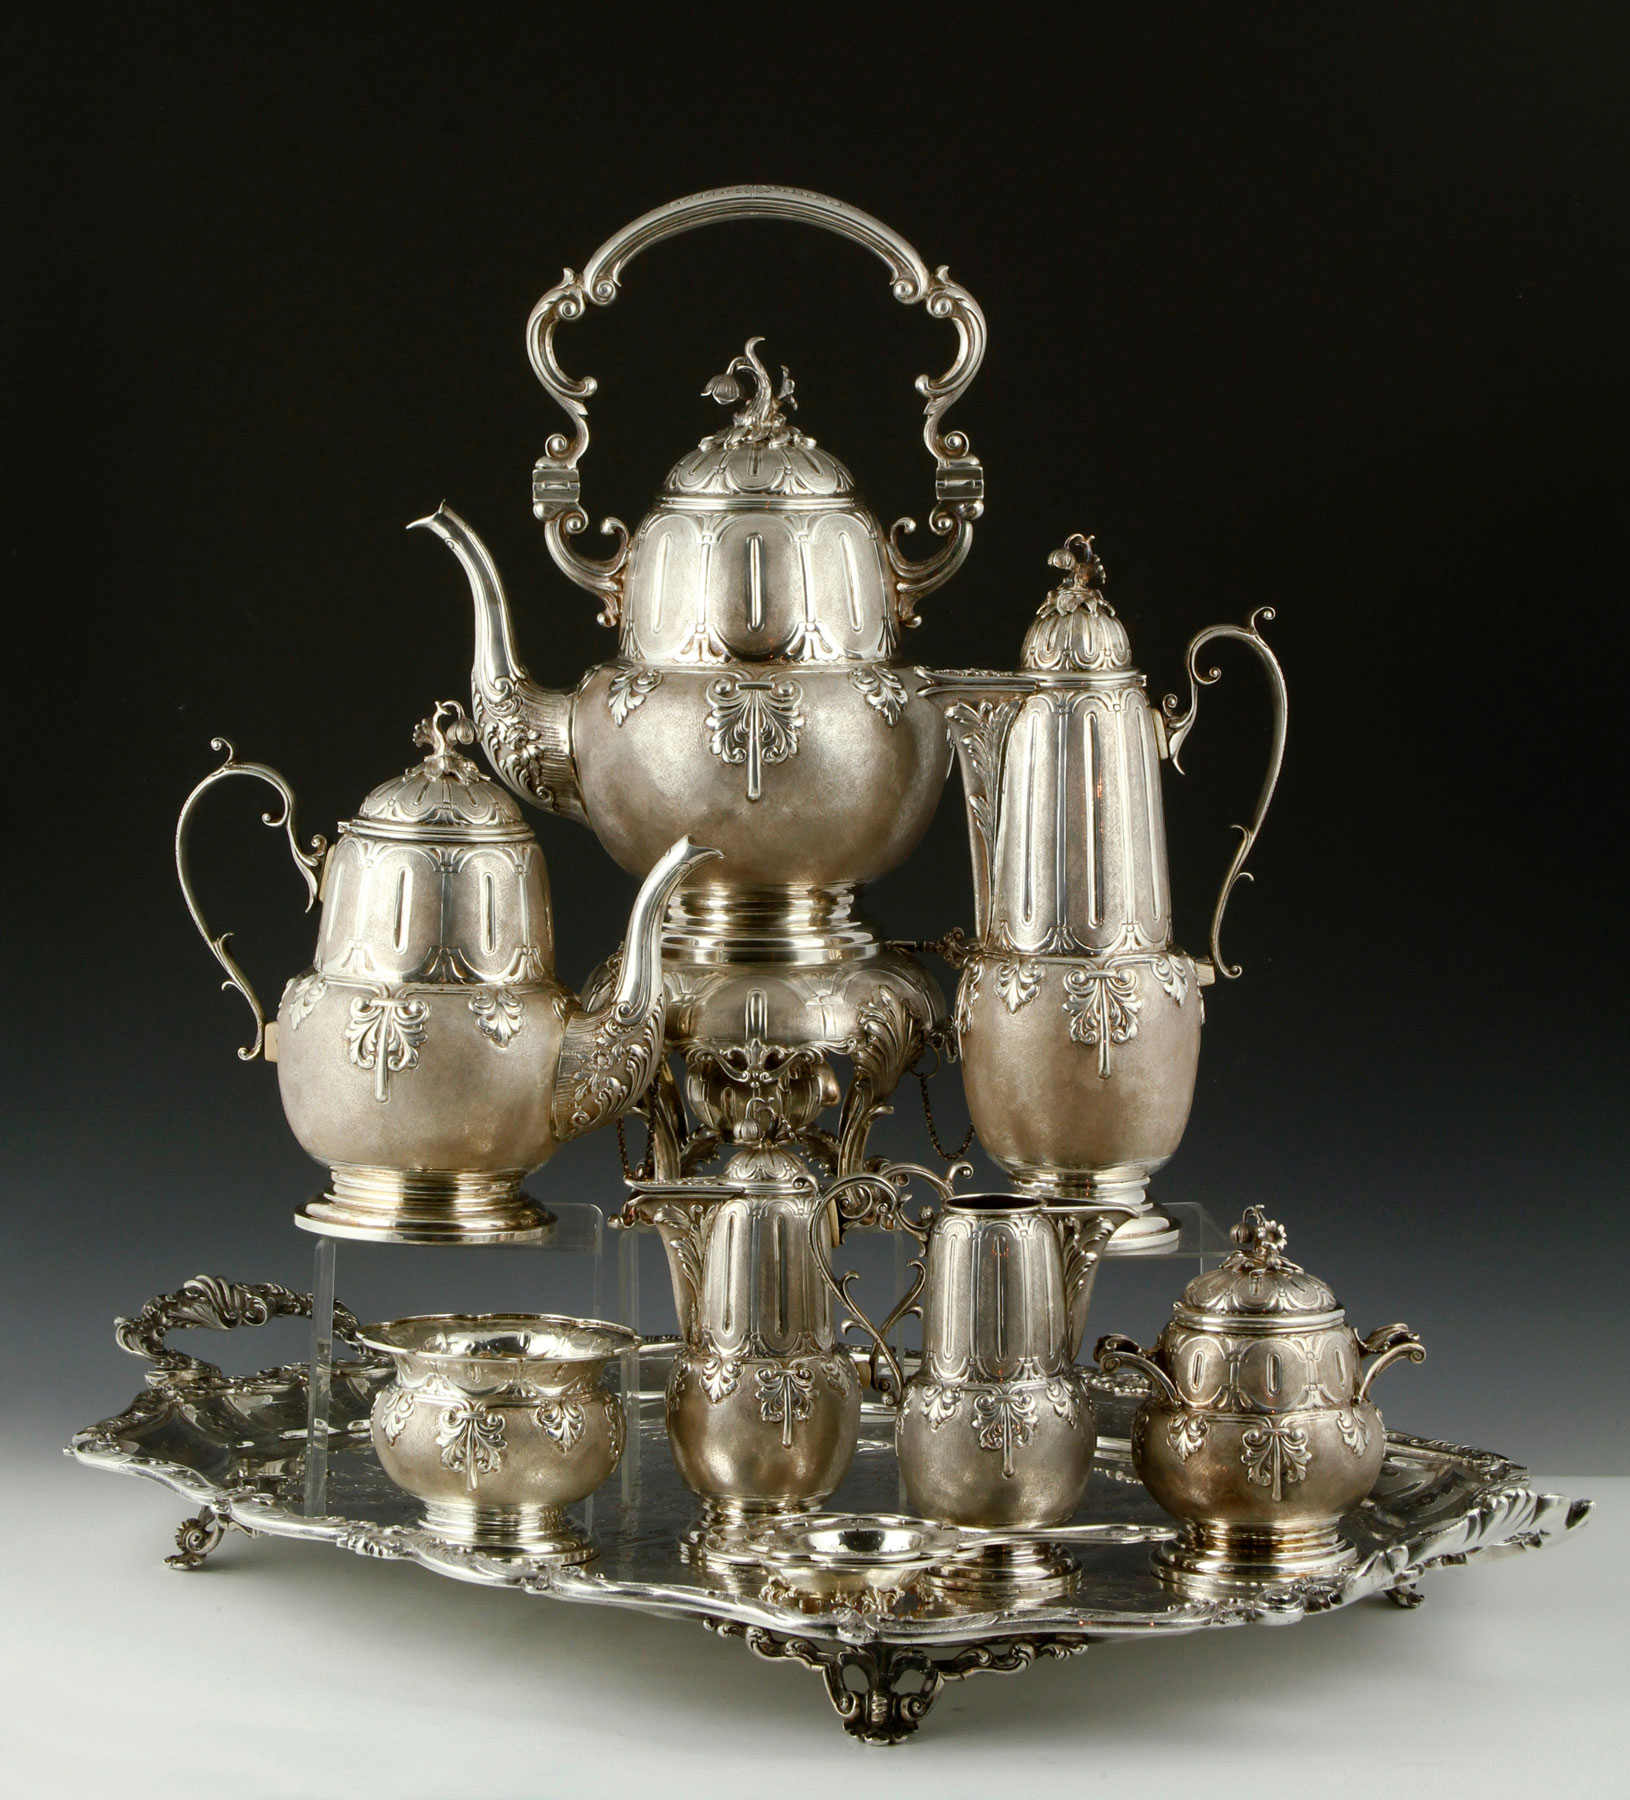 The Fornari Roma tea set lives up to its massive reputation, weighing approximately 407.6 troy ounces total weight. The sterling silver service includes a tray, water pitcher, chocolate pot, teapot and warmer, cup, sugar, covered creamer and tea strainer, all marked 'Fornari, Roma.' Kaminski Auctions images